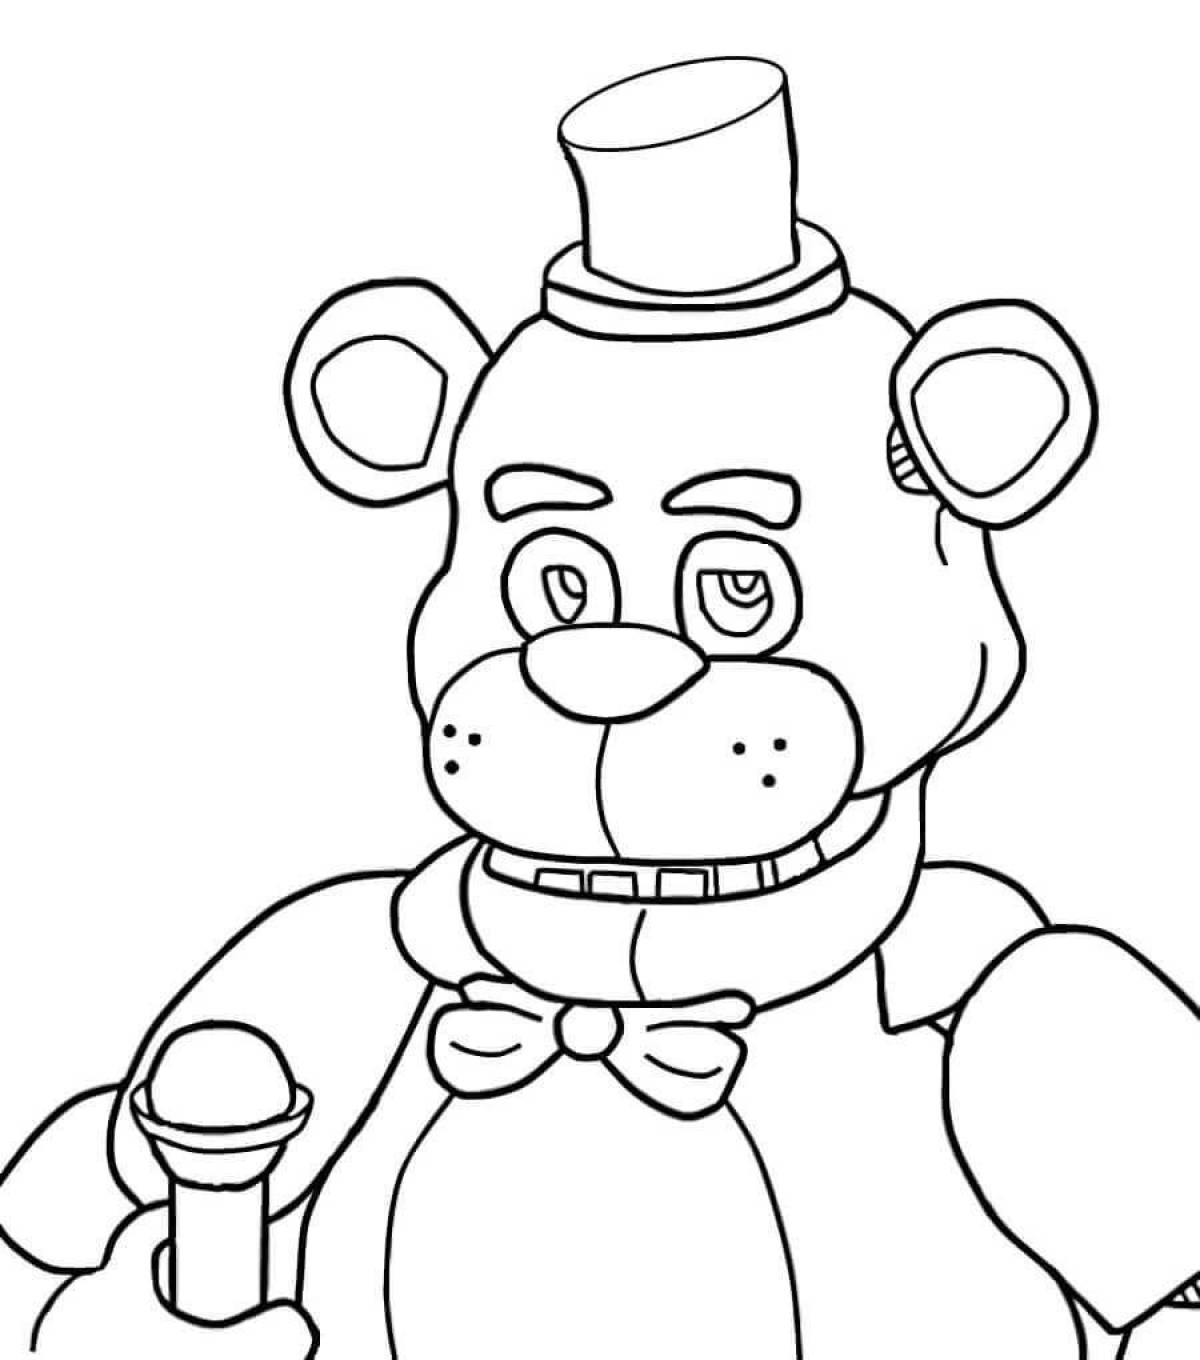 Coloring comical chick from fnaf 1